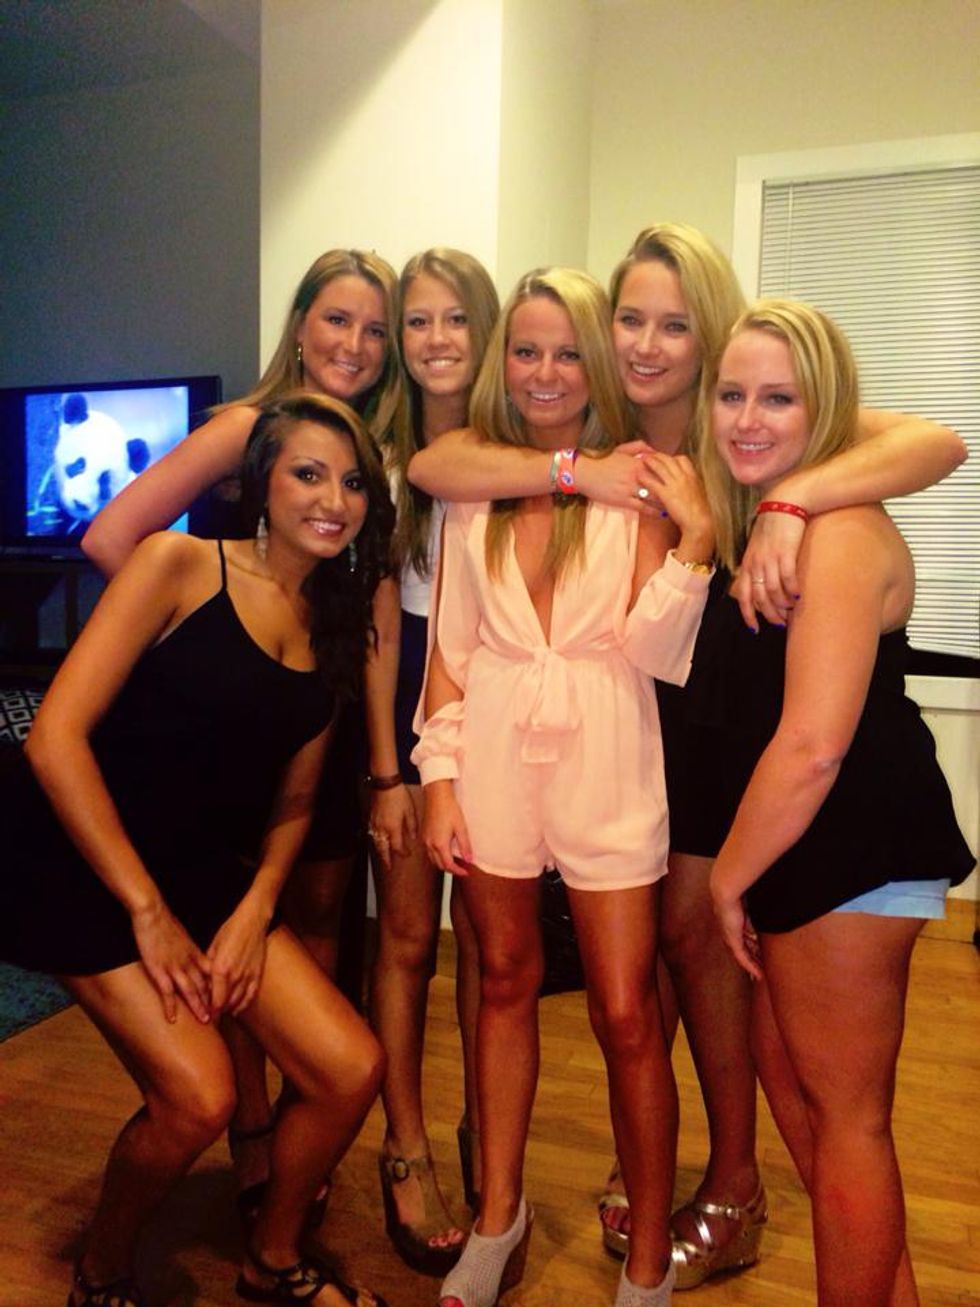 14 Things Our College Friends Have Taught Us